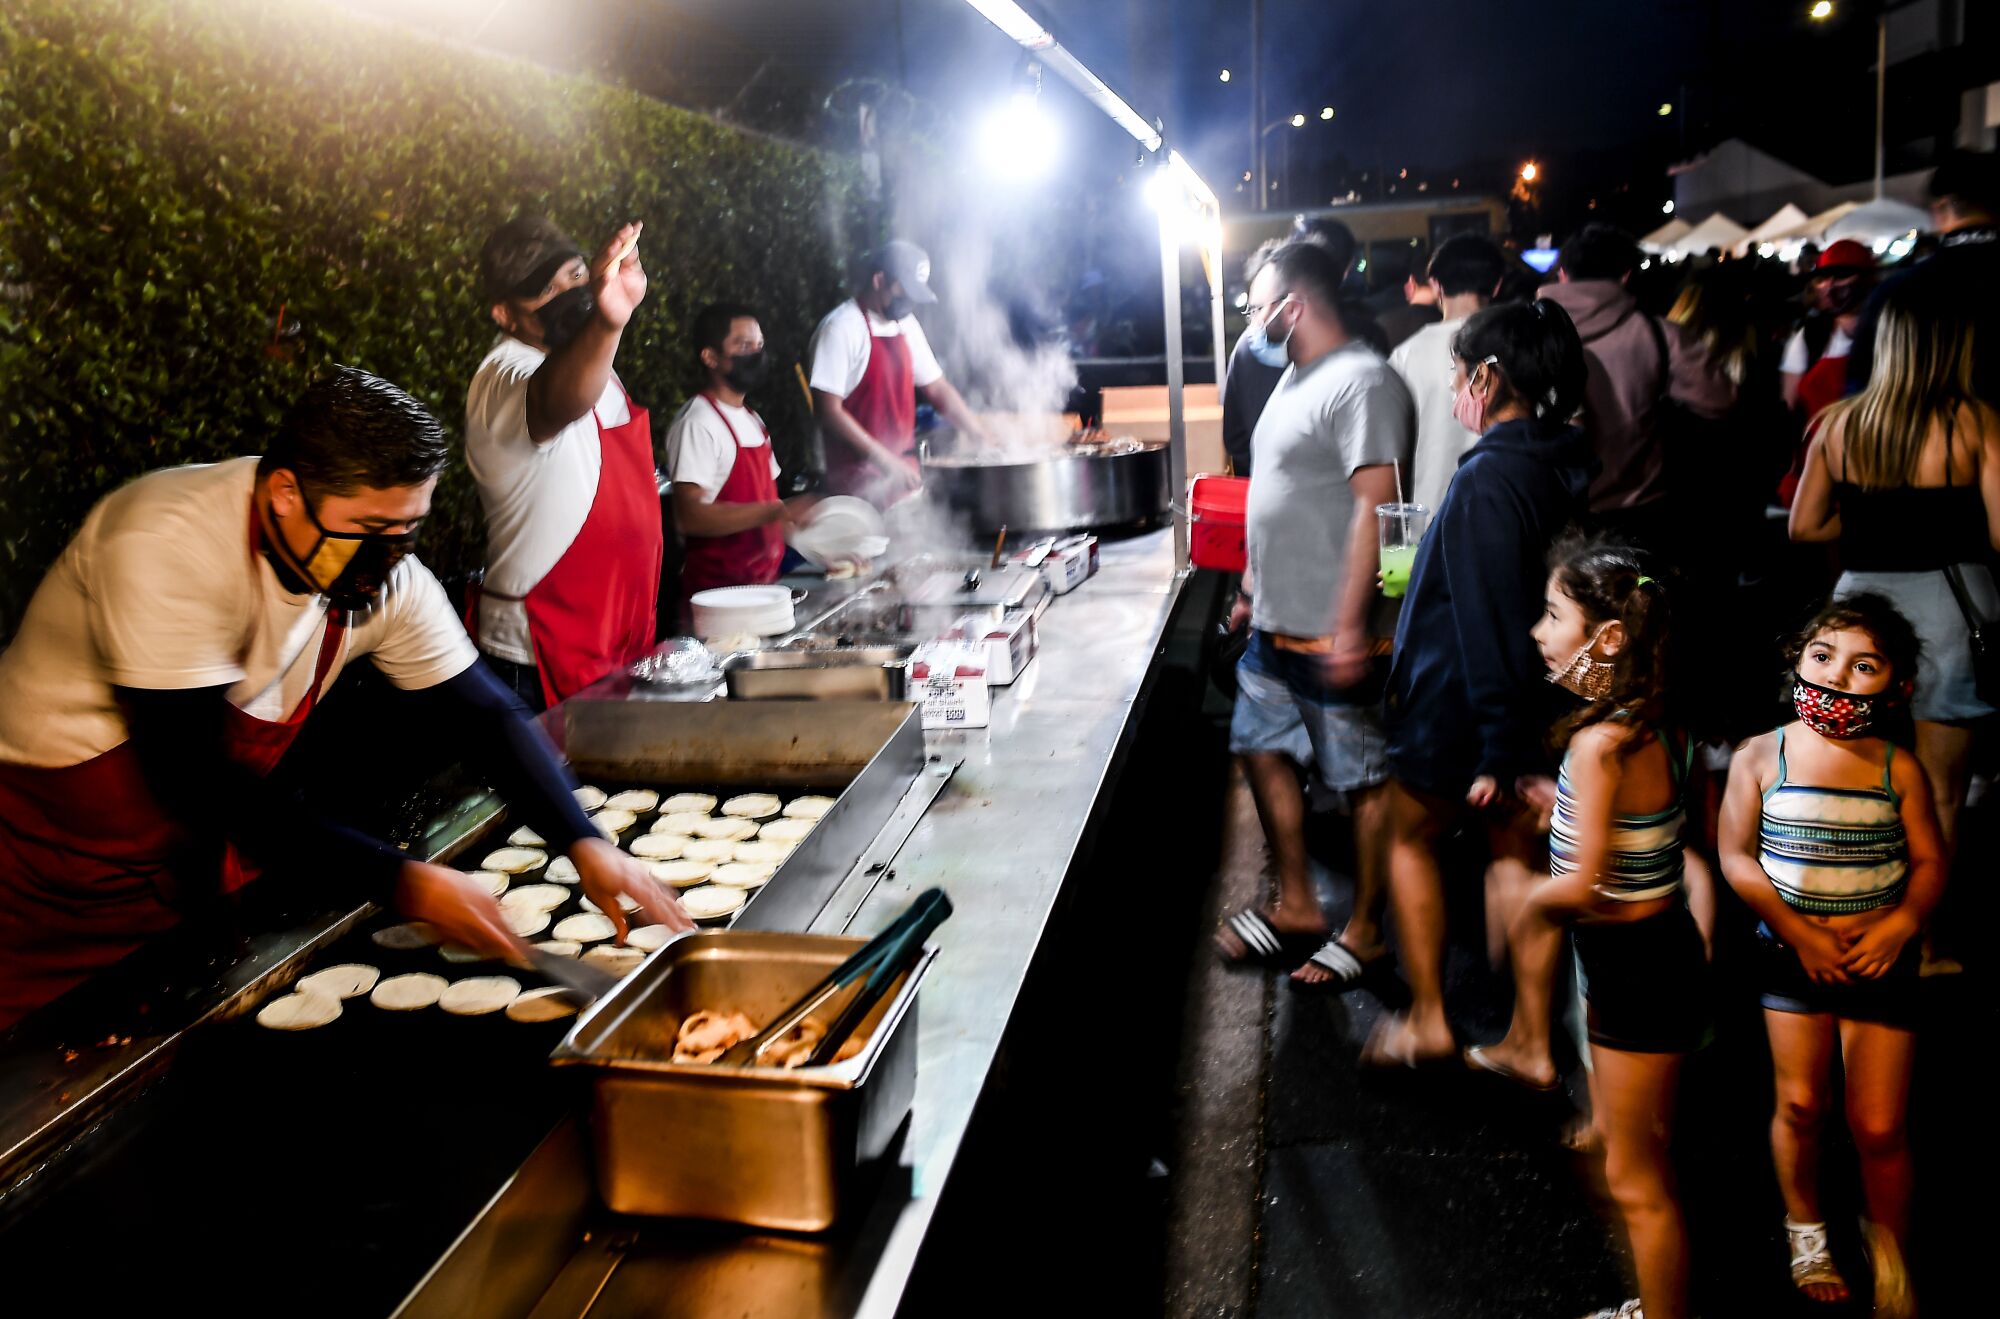 Adults and children wait to be served at an outdoor taco stand at night.